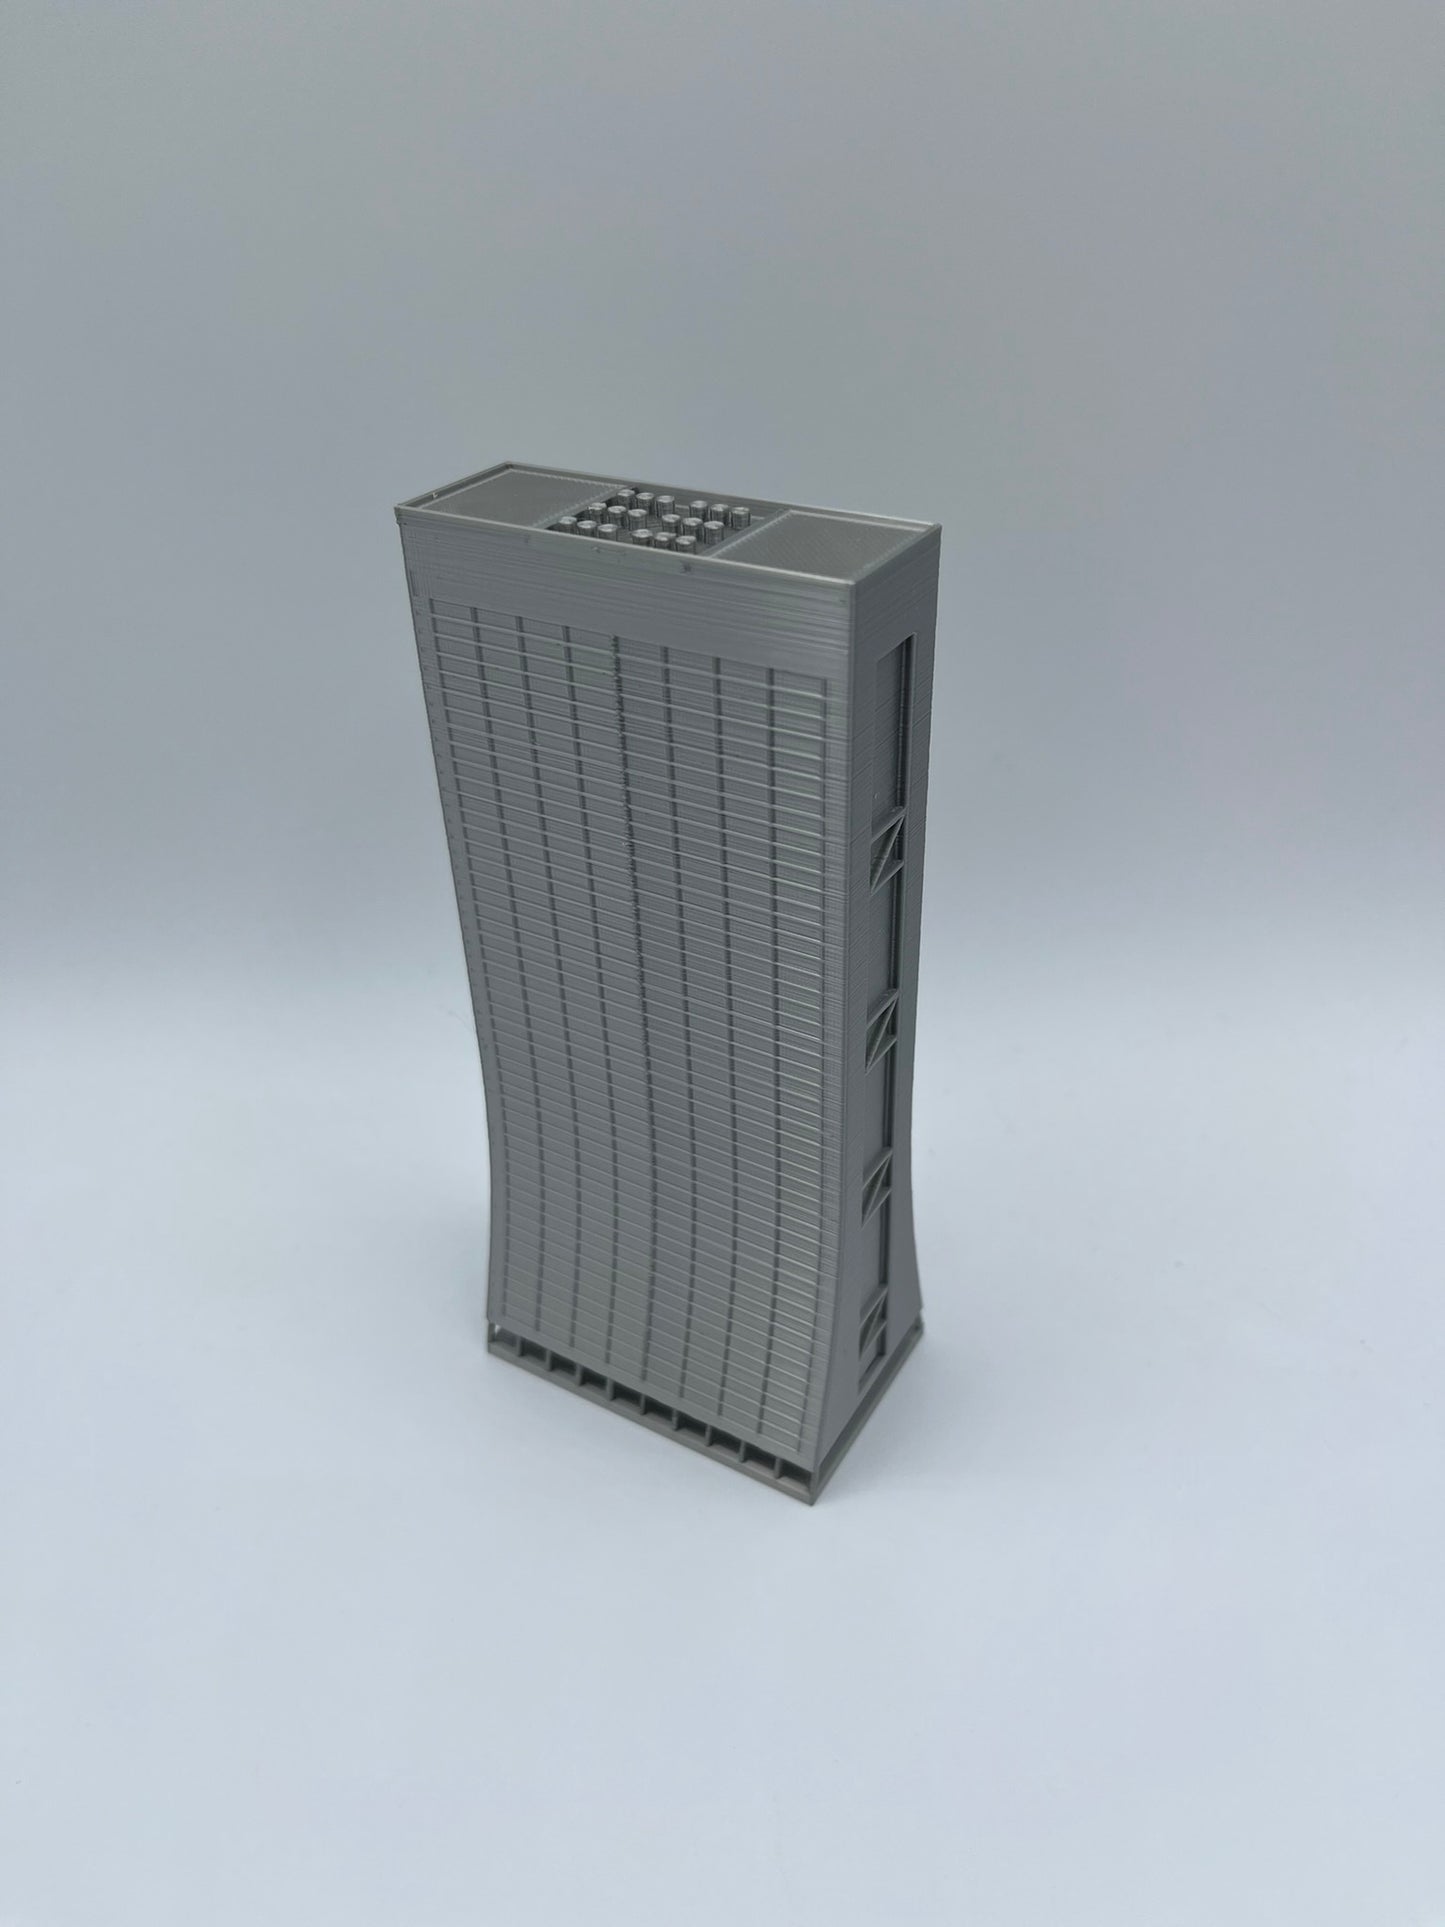 Solow Building Model- 3D Printed